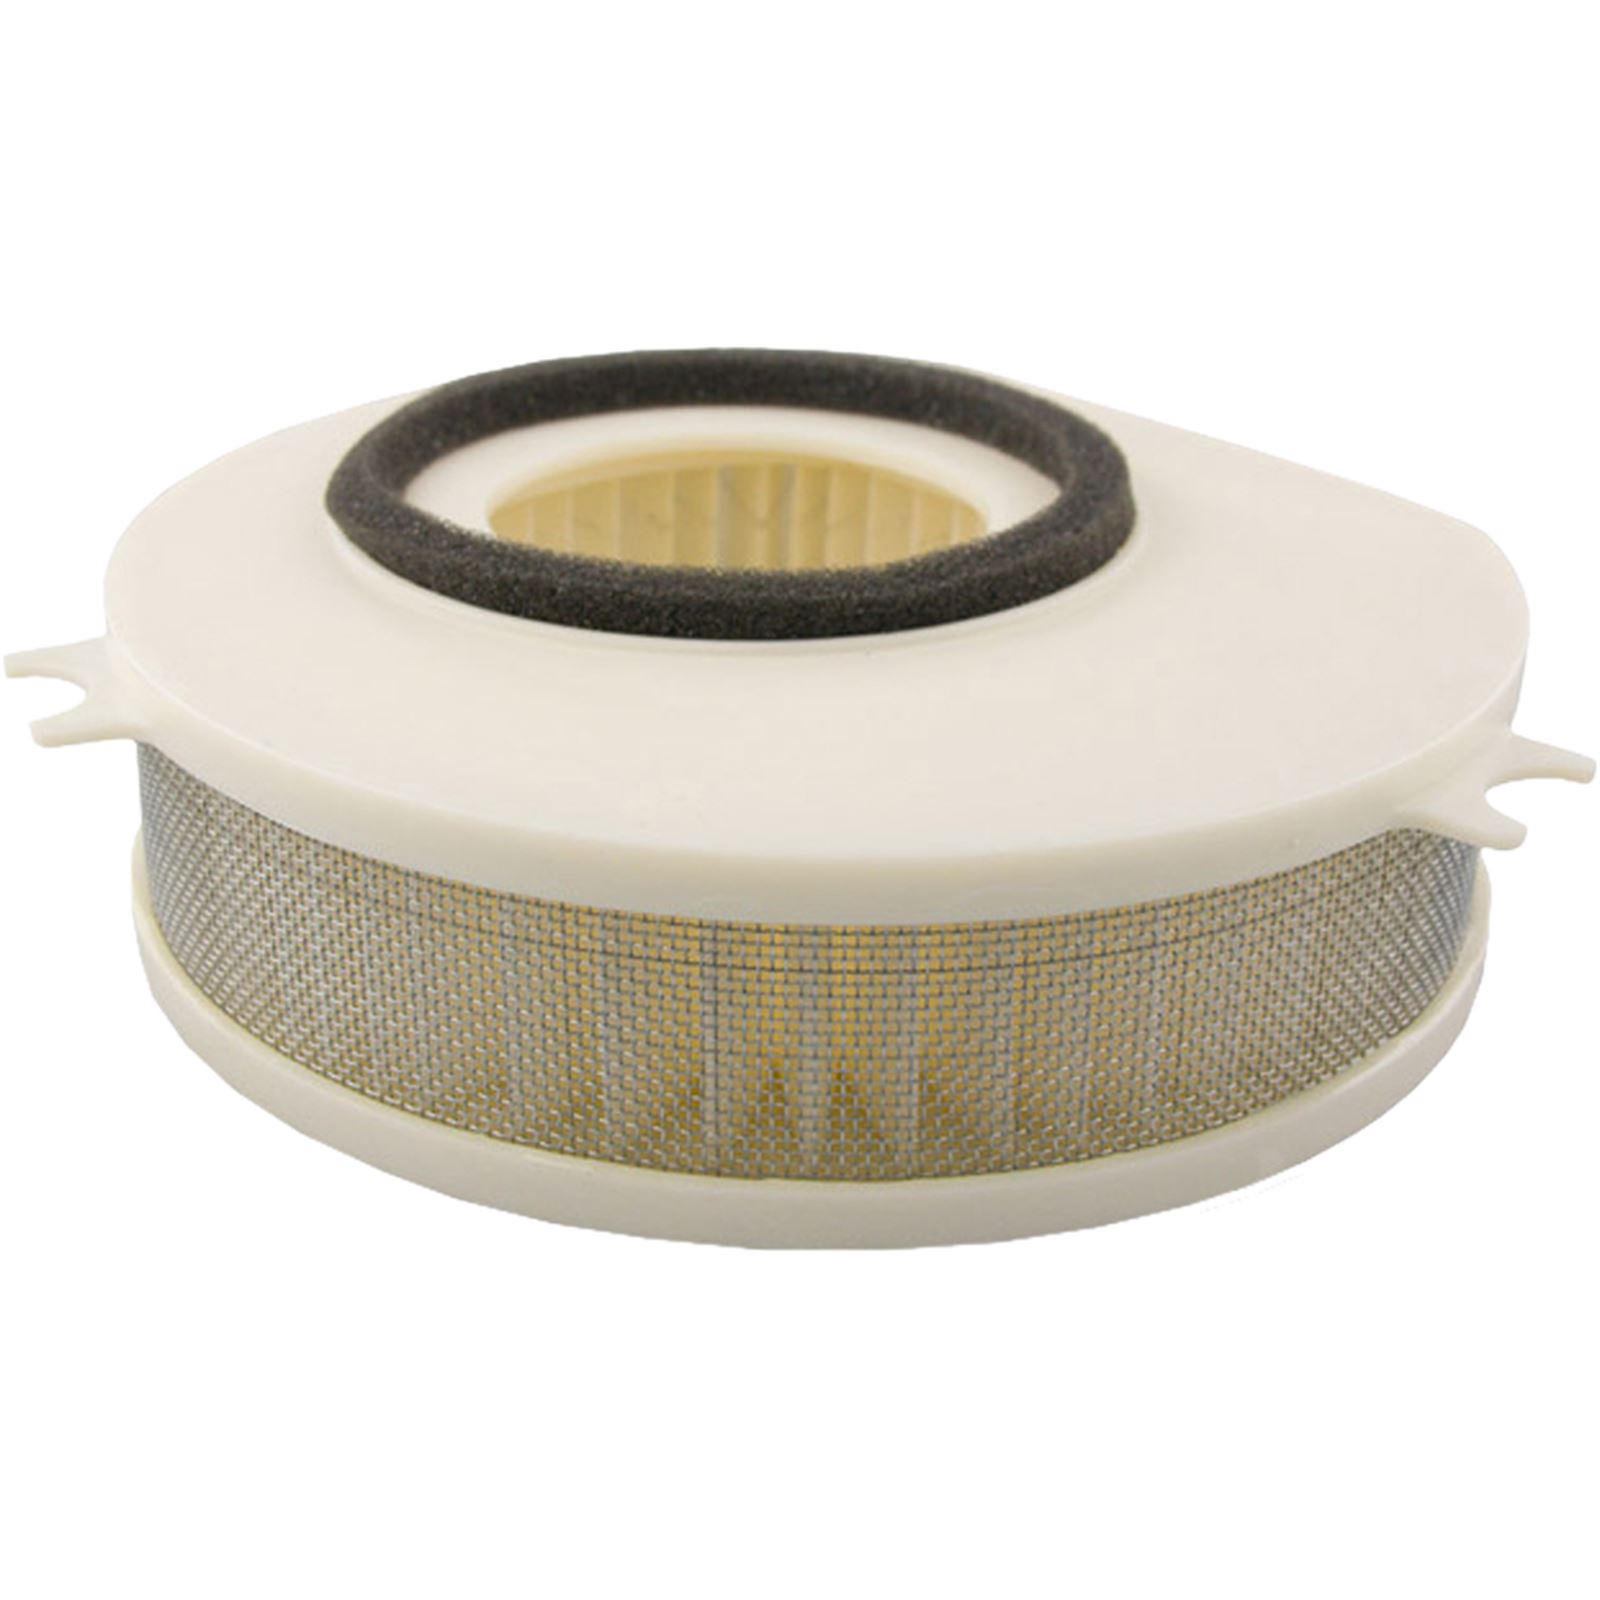 For Kawasaki Z750 Z750R Z750S Z800 ZR800 Z1000 Motorcycle Accessories  AirFilter Air Intake Cleaner Filter Replacement